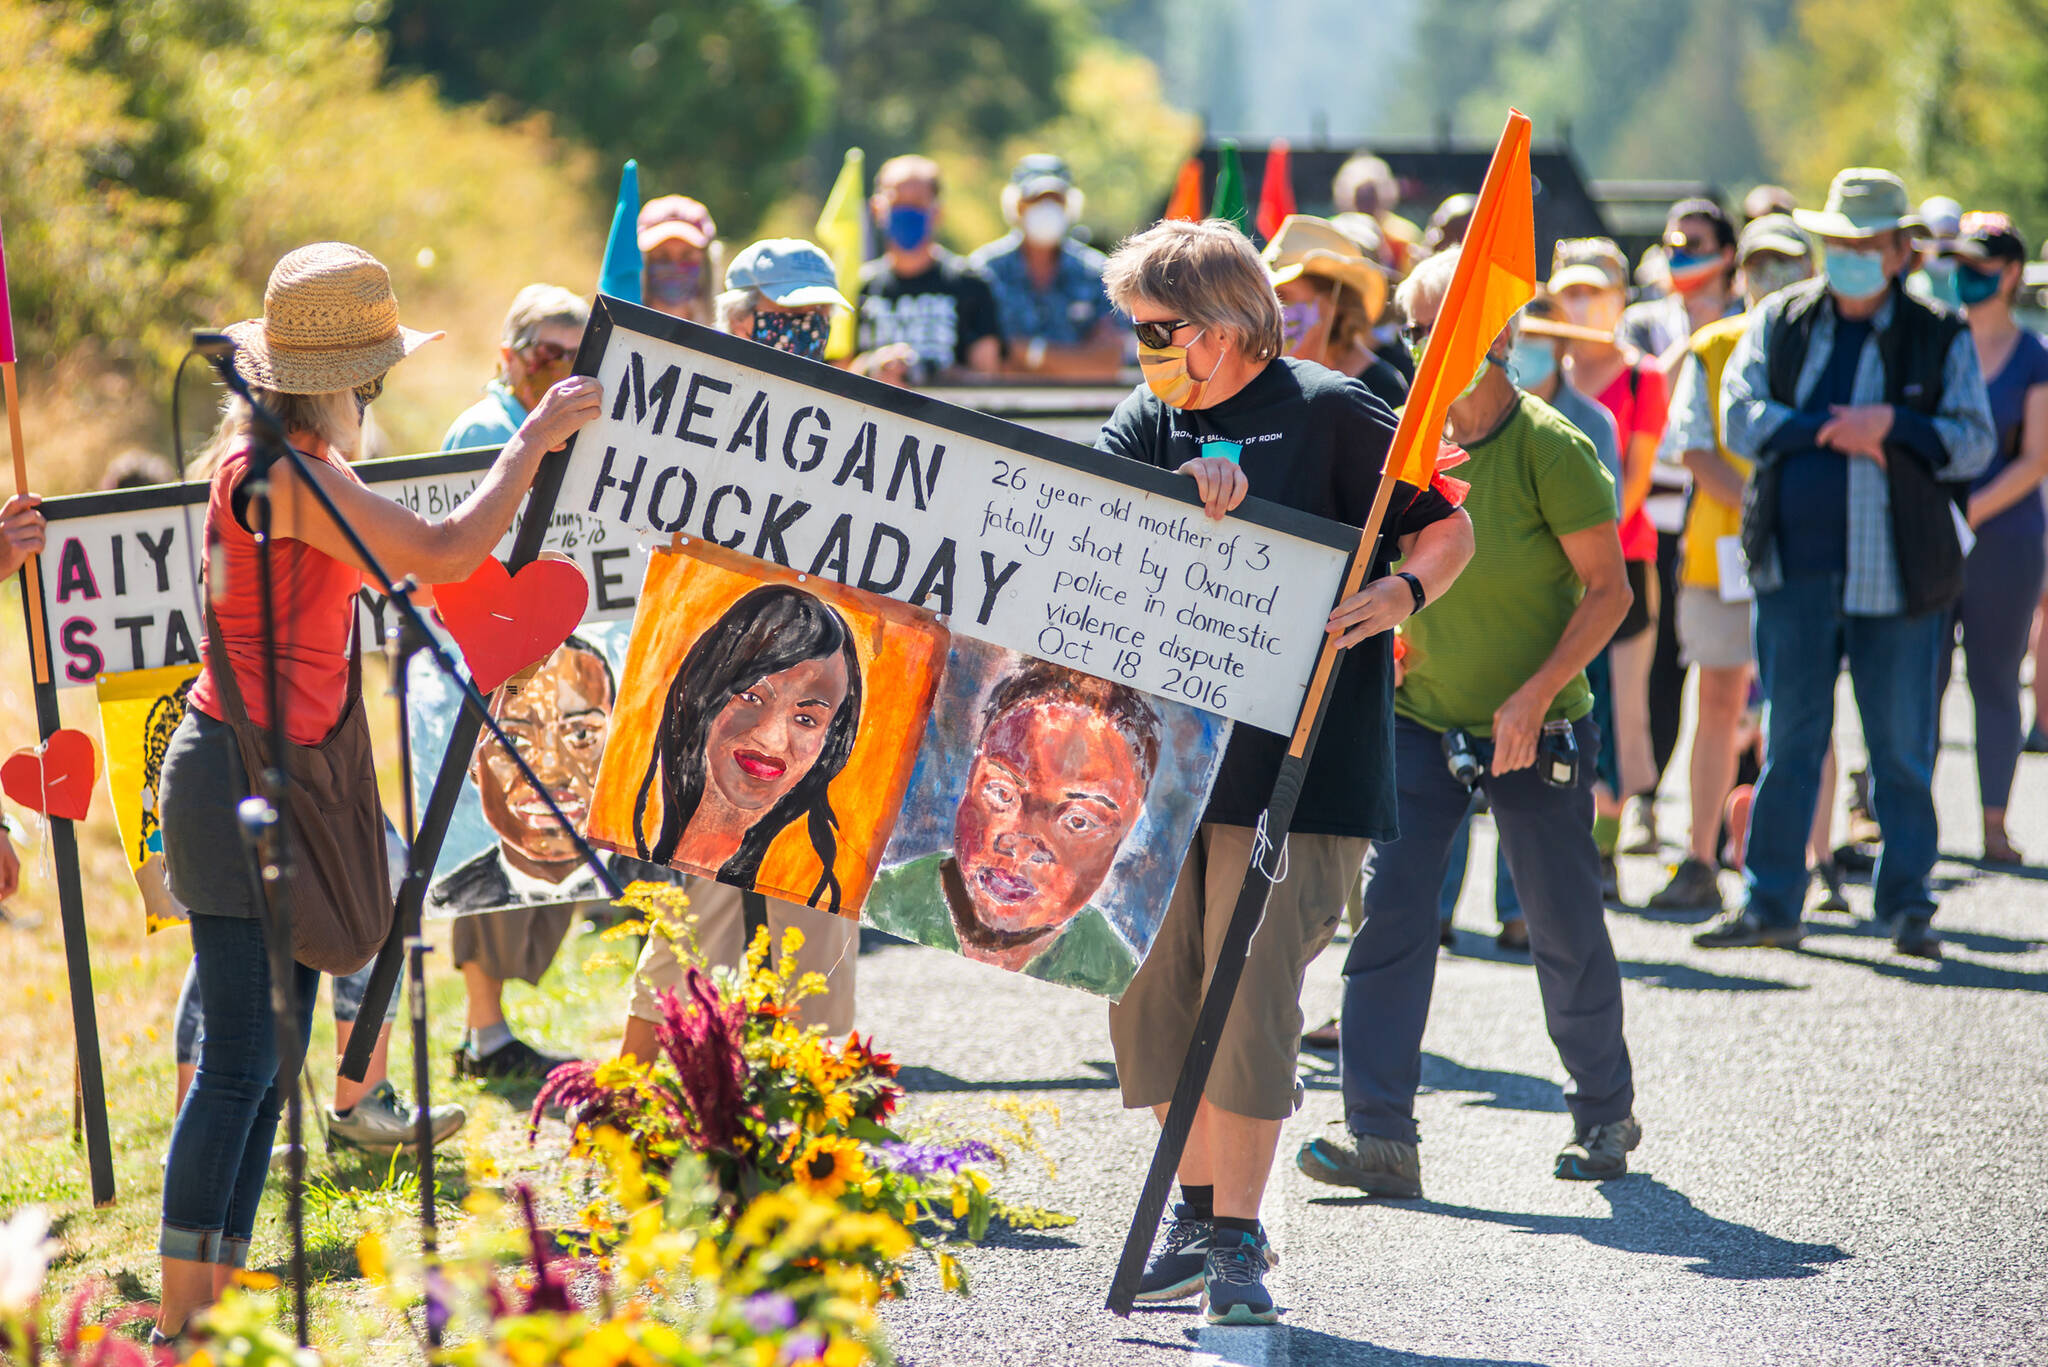 Lopezians gathered to honor Black lives lost as they respectfully removed memorial signs along the side of Fisherman Bay Road on Sept. 6, 2020. (Robert S. Harrison/contributed photo)